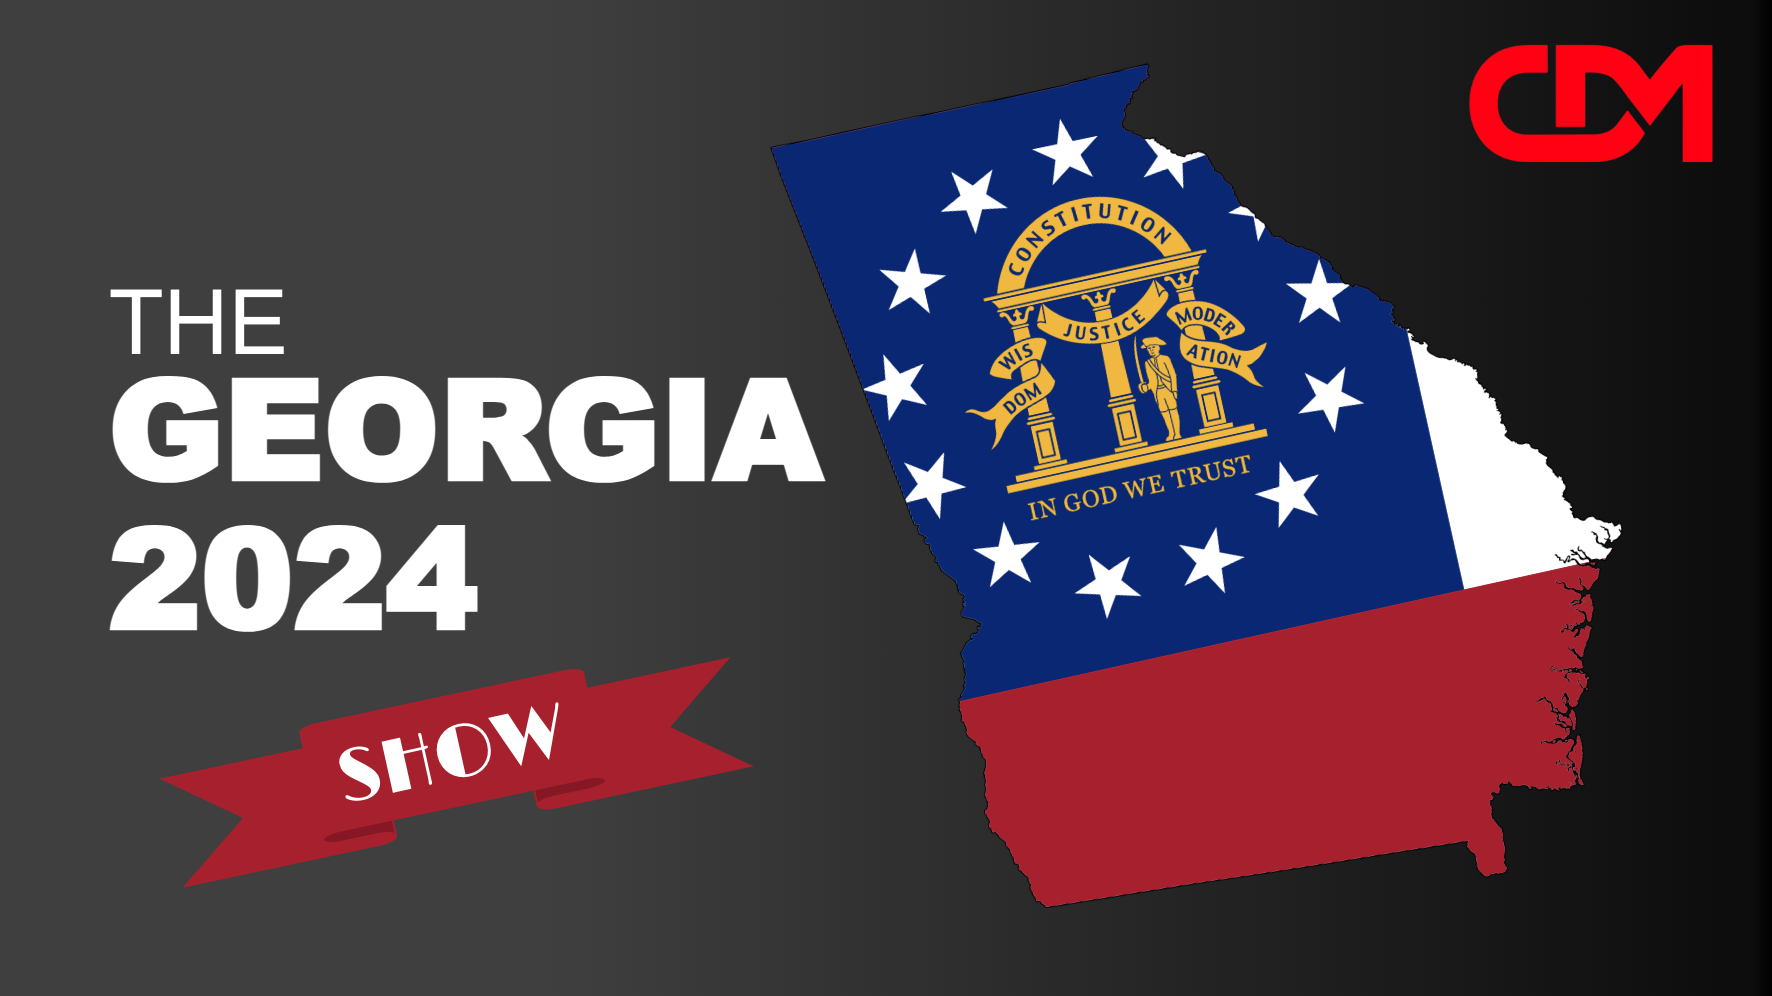 The Georgia 2024 Show! Patrick Byrne, Hank Sullivan with/ L Todd Wood and Bill Quinn 12/13/23